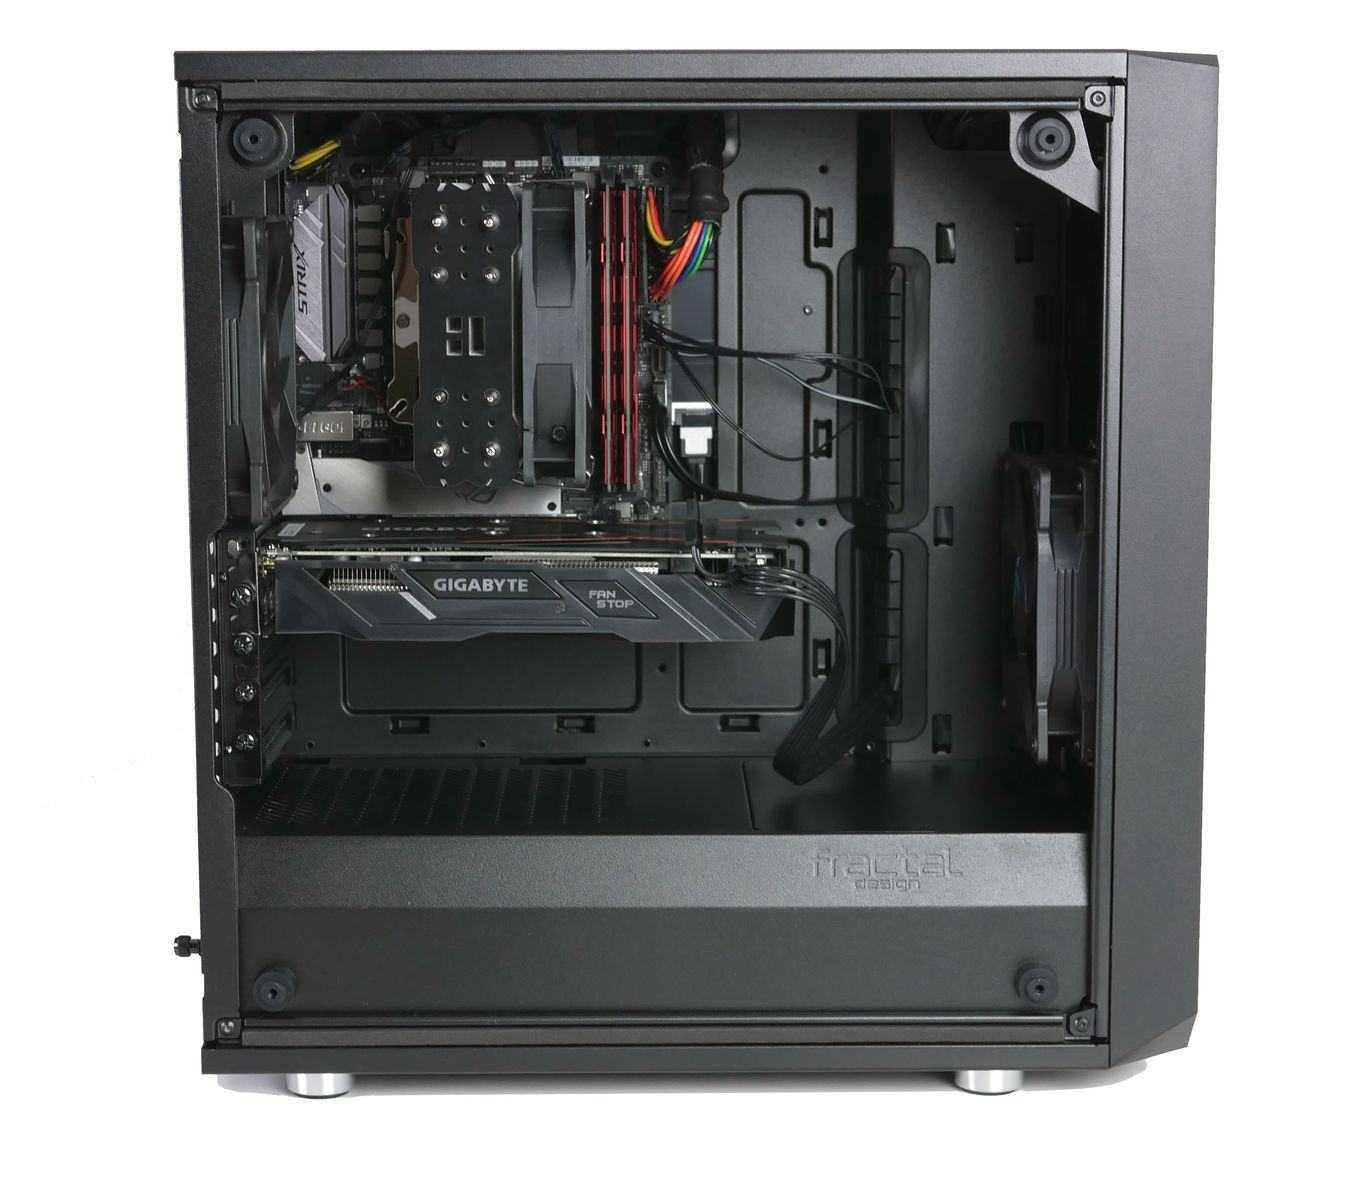 Fractal design meshify c mini black micro atx high-airflow compact tinted tempered glass window mid tower computer case